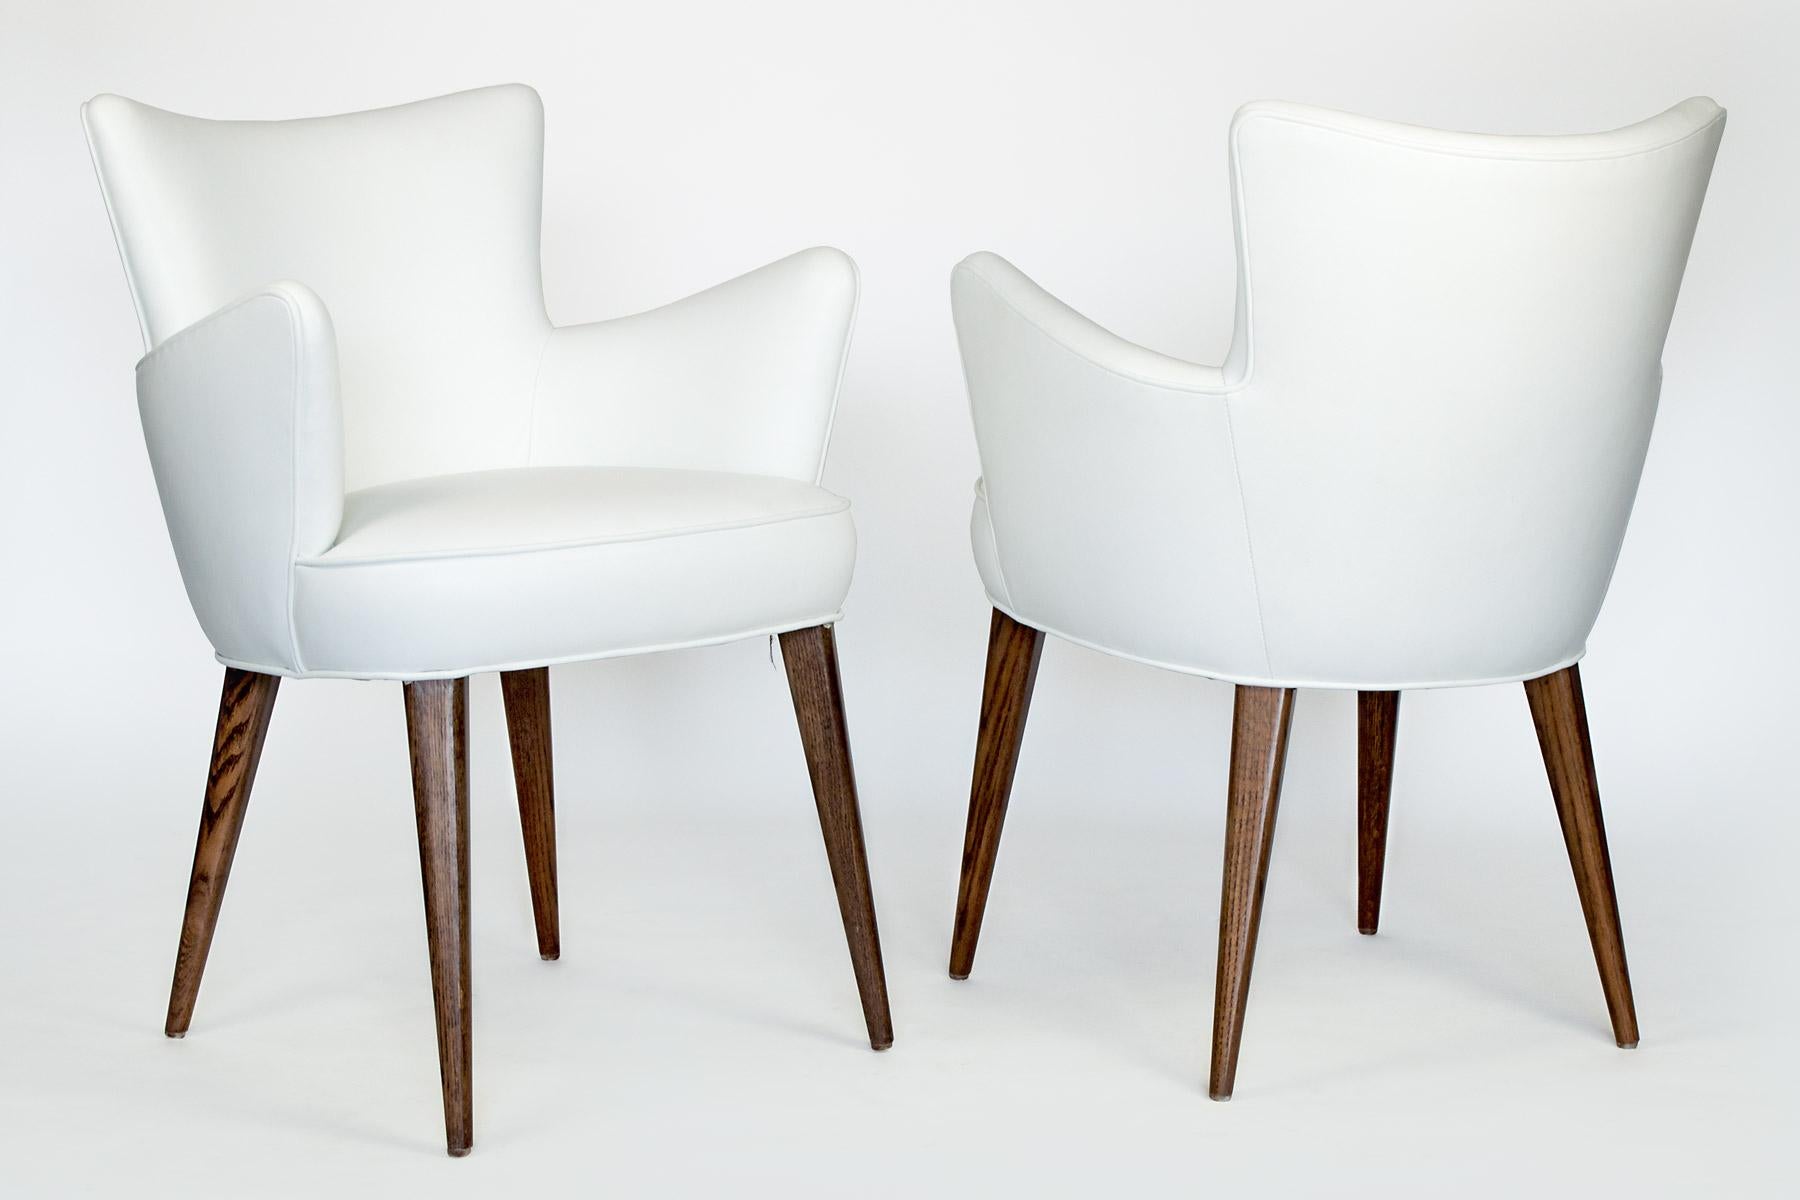 American Set of Four White Leather Aube Chairs by Bourgeois Boheme Atelier For Sale